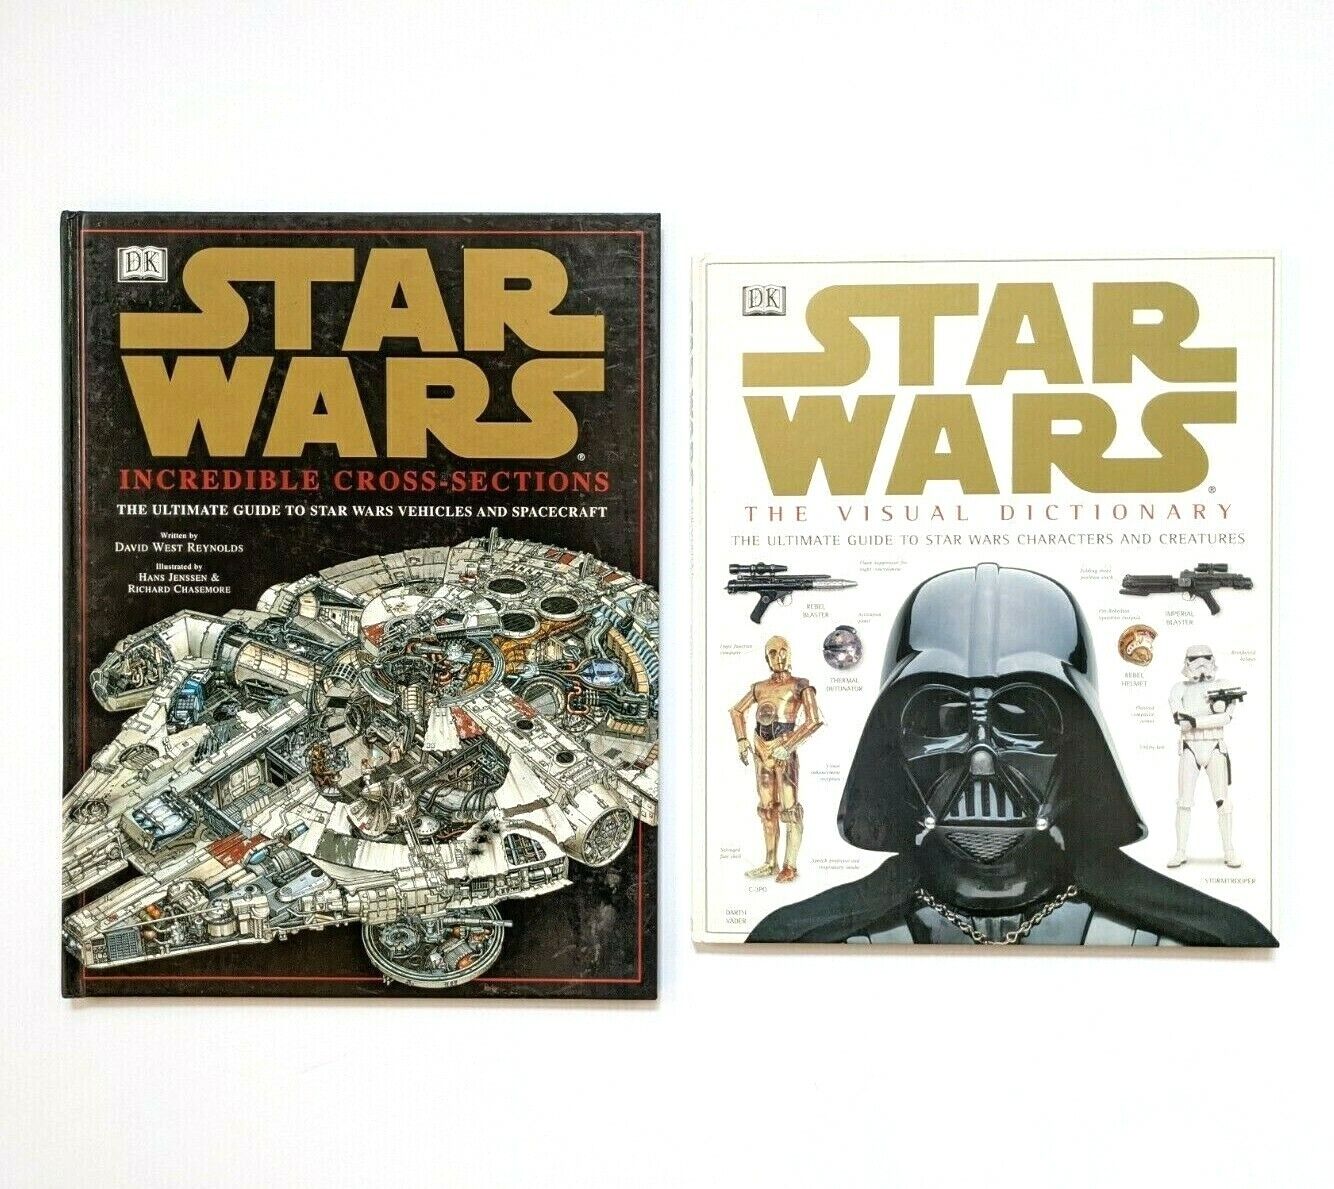 Star Wars: The Visual Dictionary & Incredible Cross Sections Hardcover Books